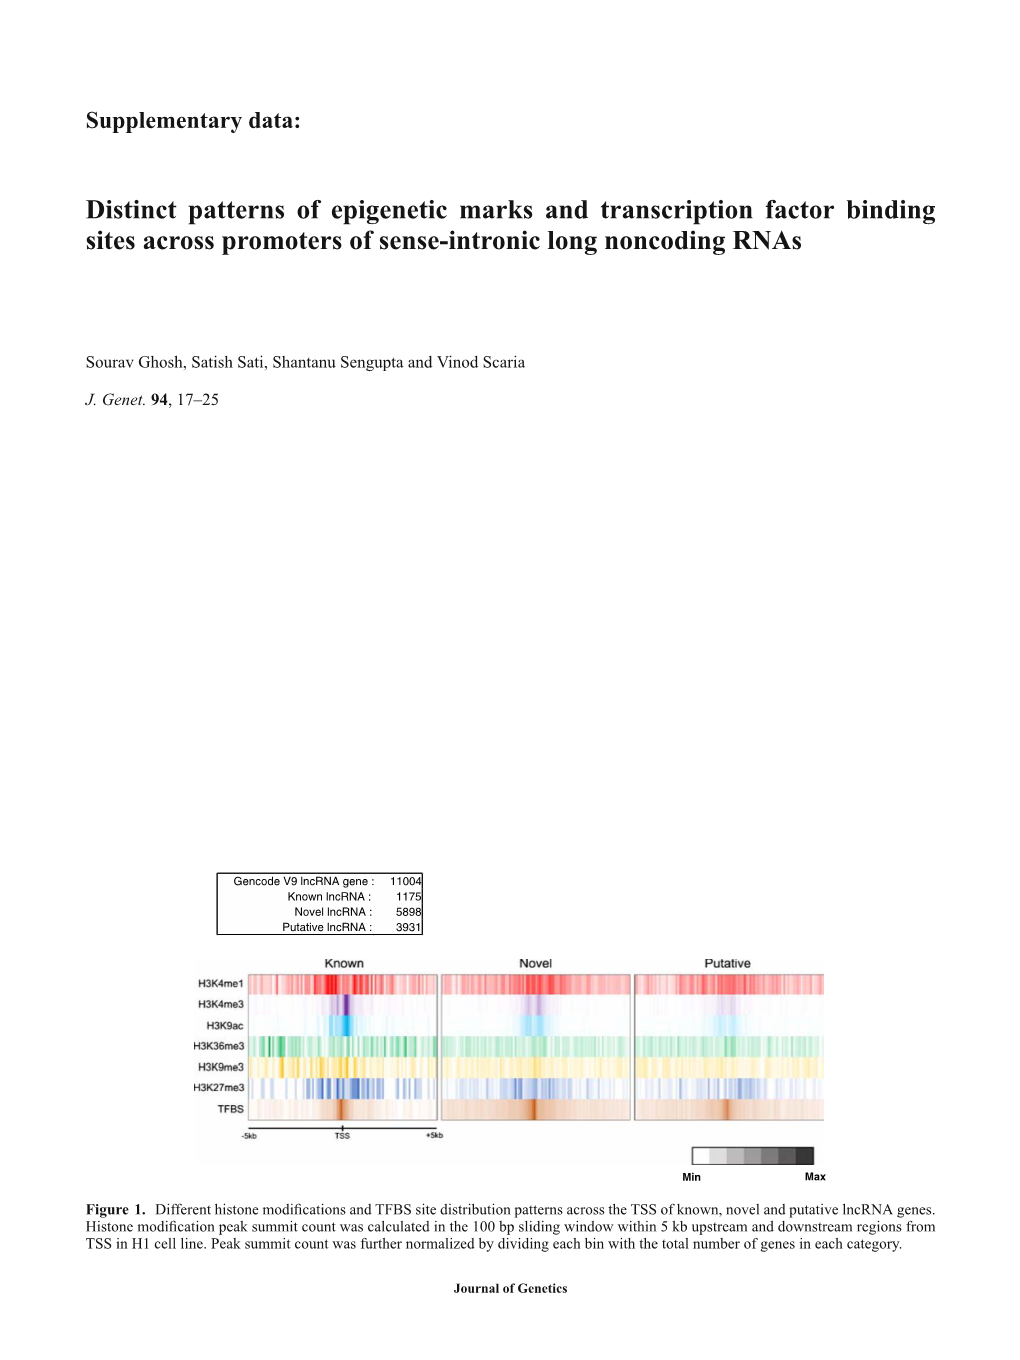 Distinct Patterns of Epigenetic Marks and Transcription Factor Binding Sites Across Promoters of Sense-Intronic Long Noncoding Rnas